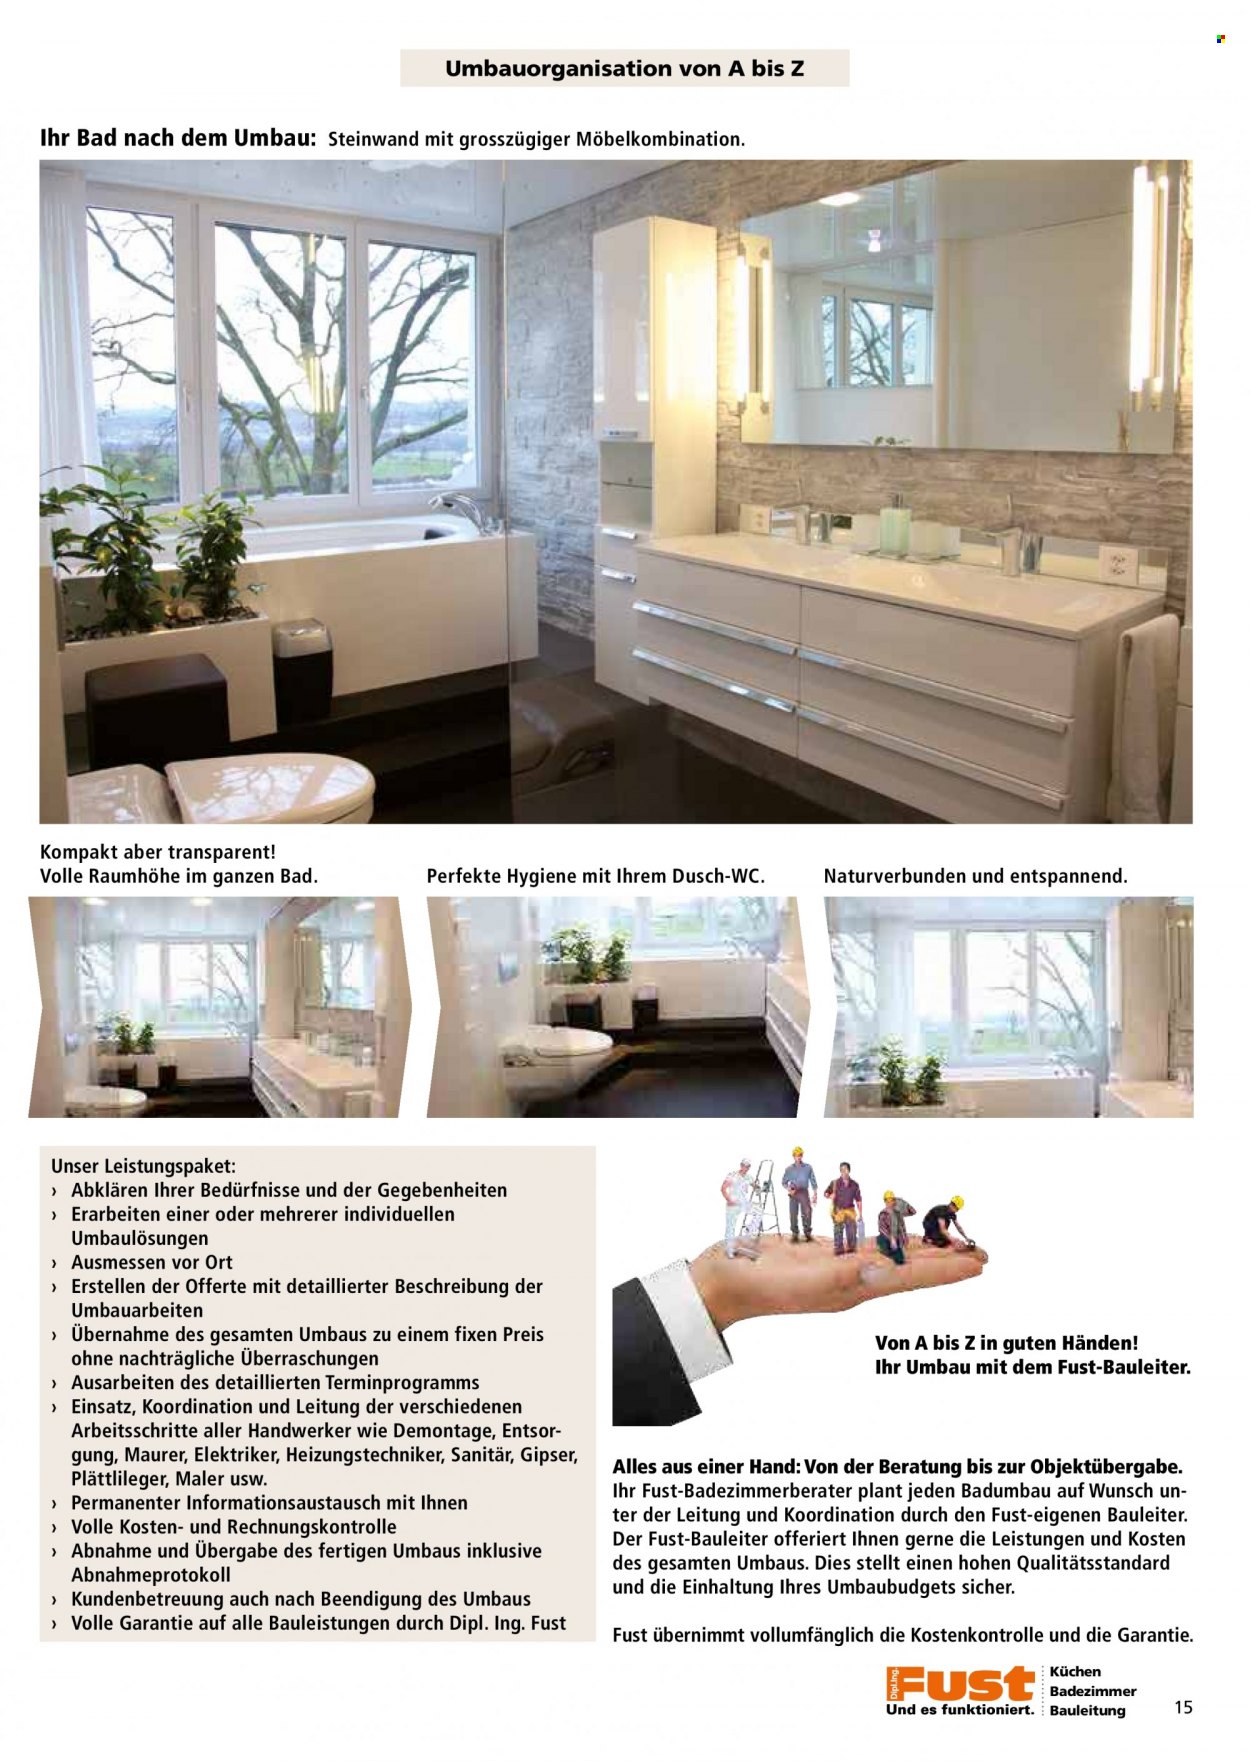 Catalogue Fust. Page 15.